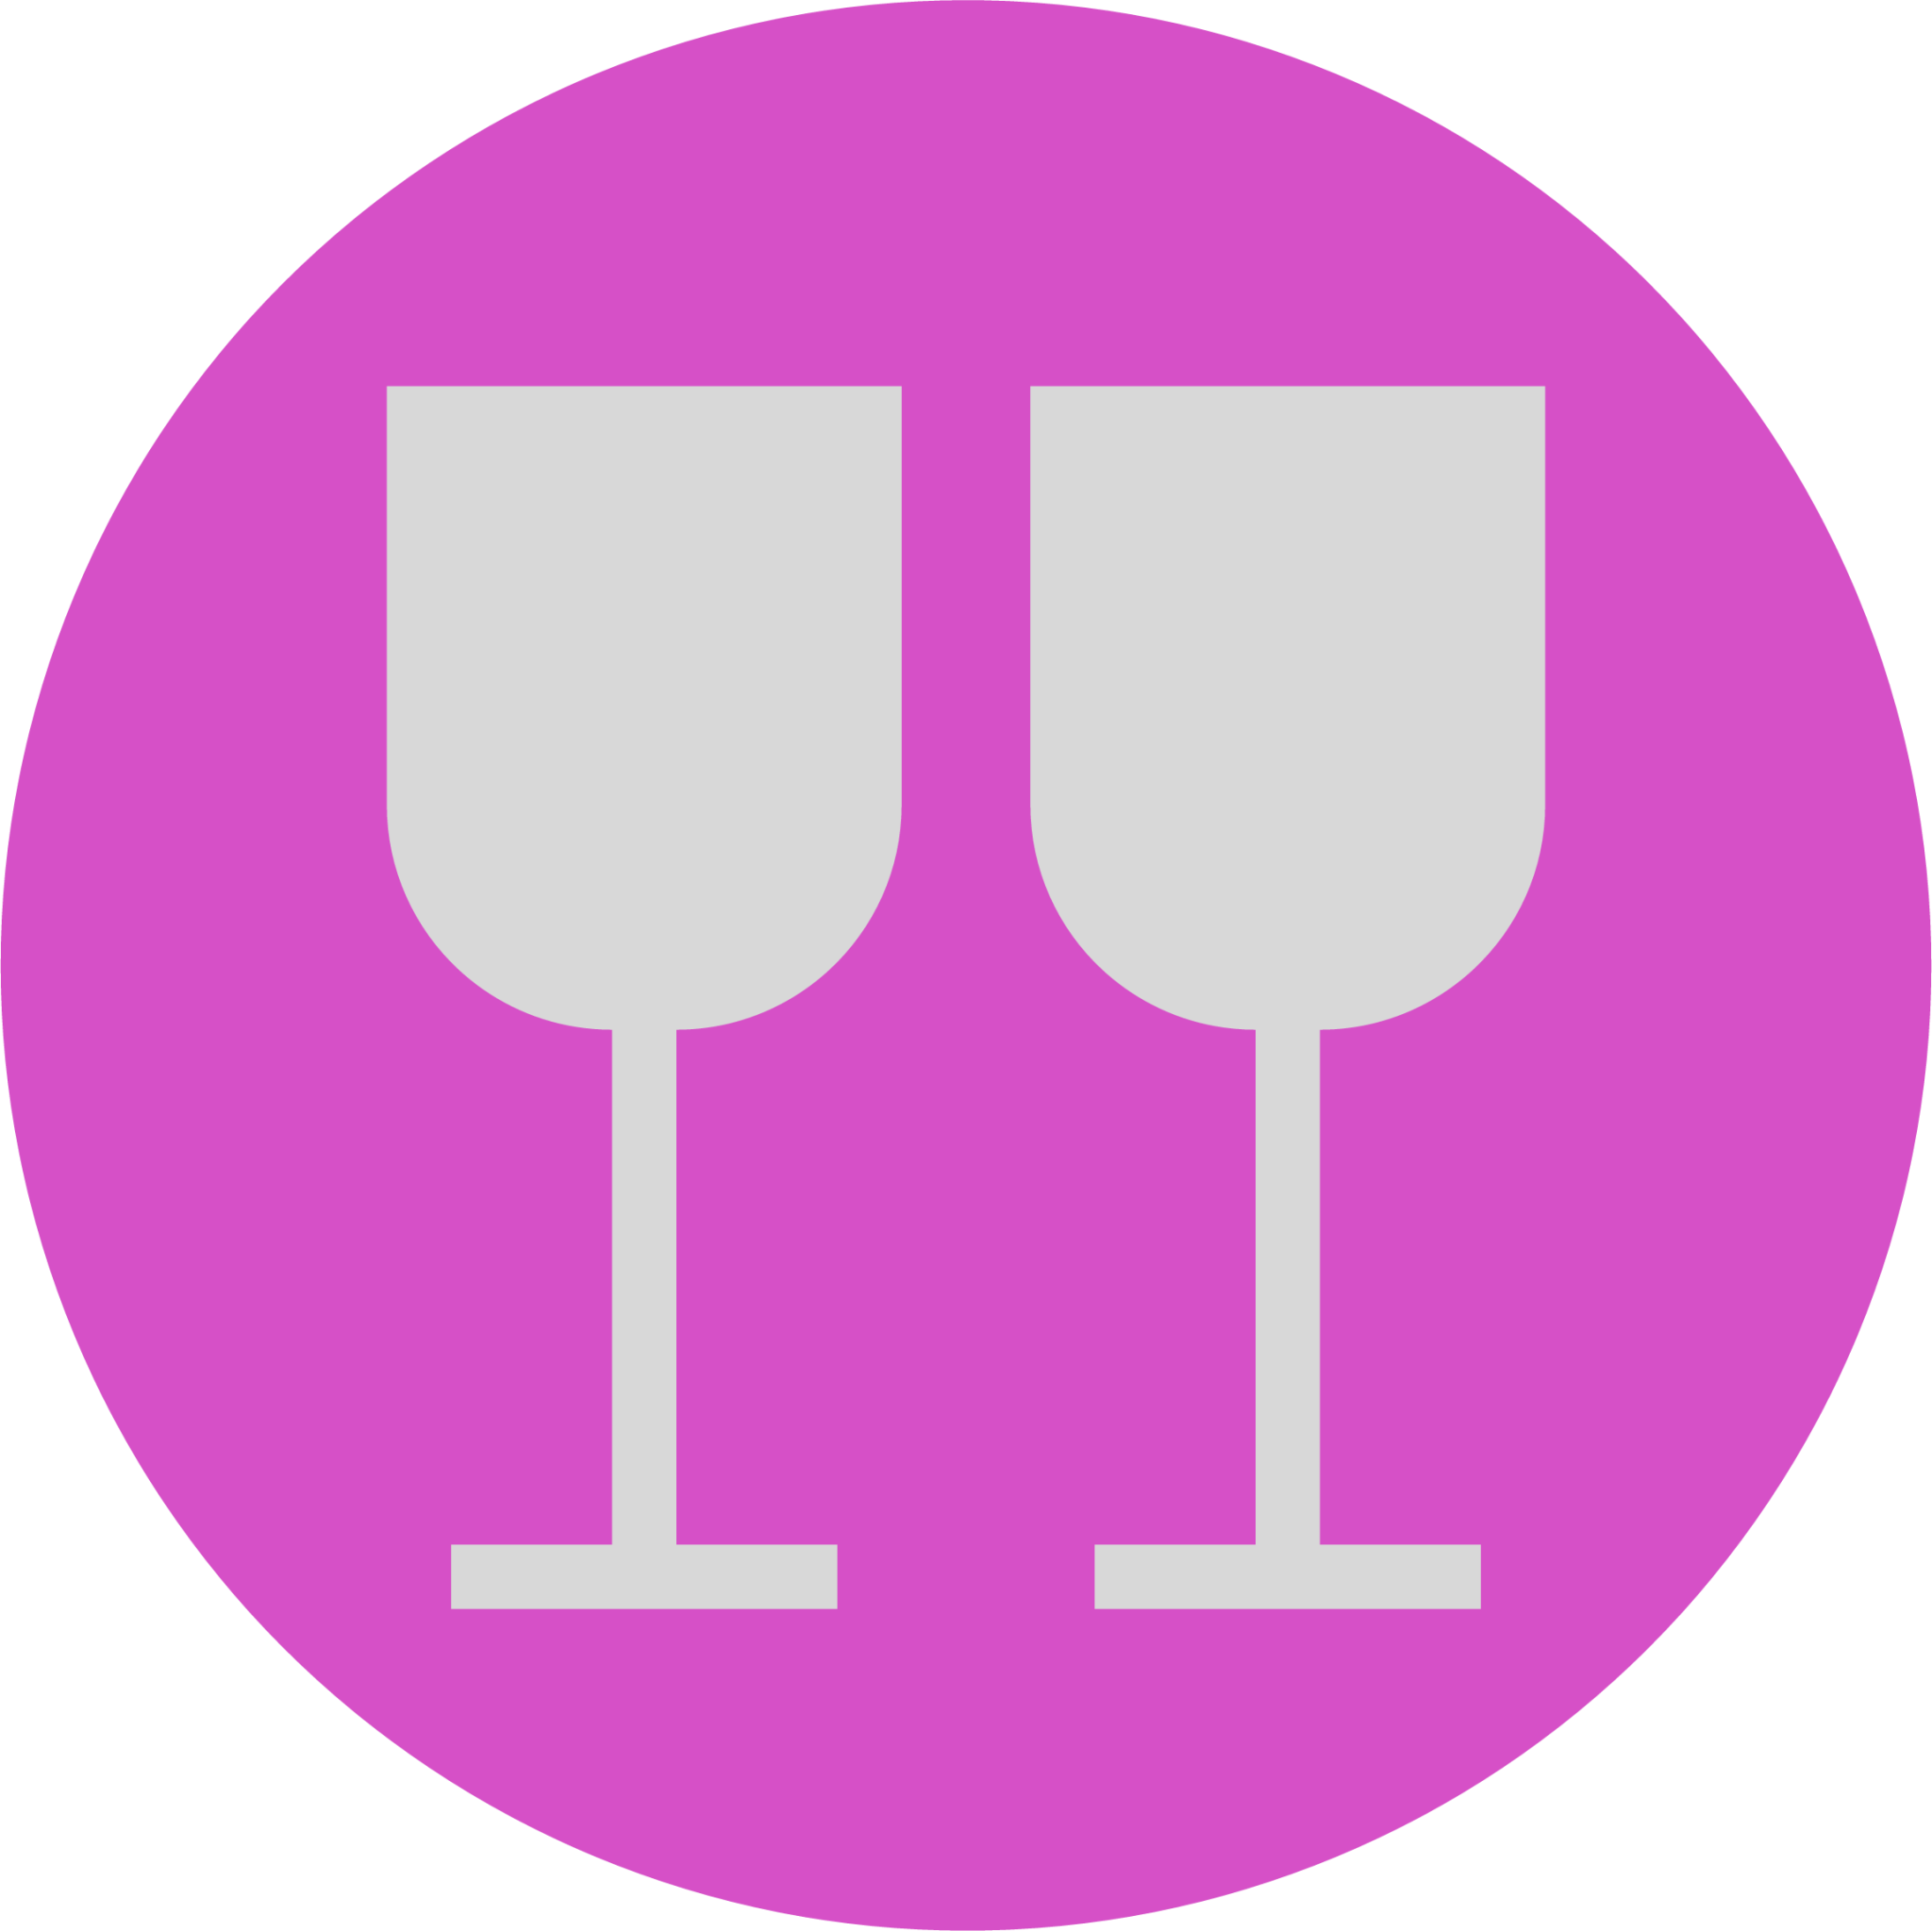 two glasses on a pink plate icon